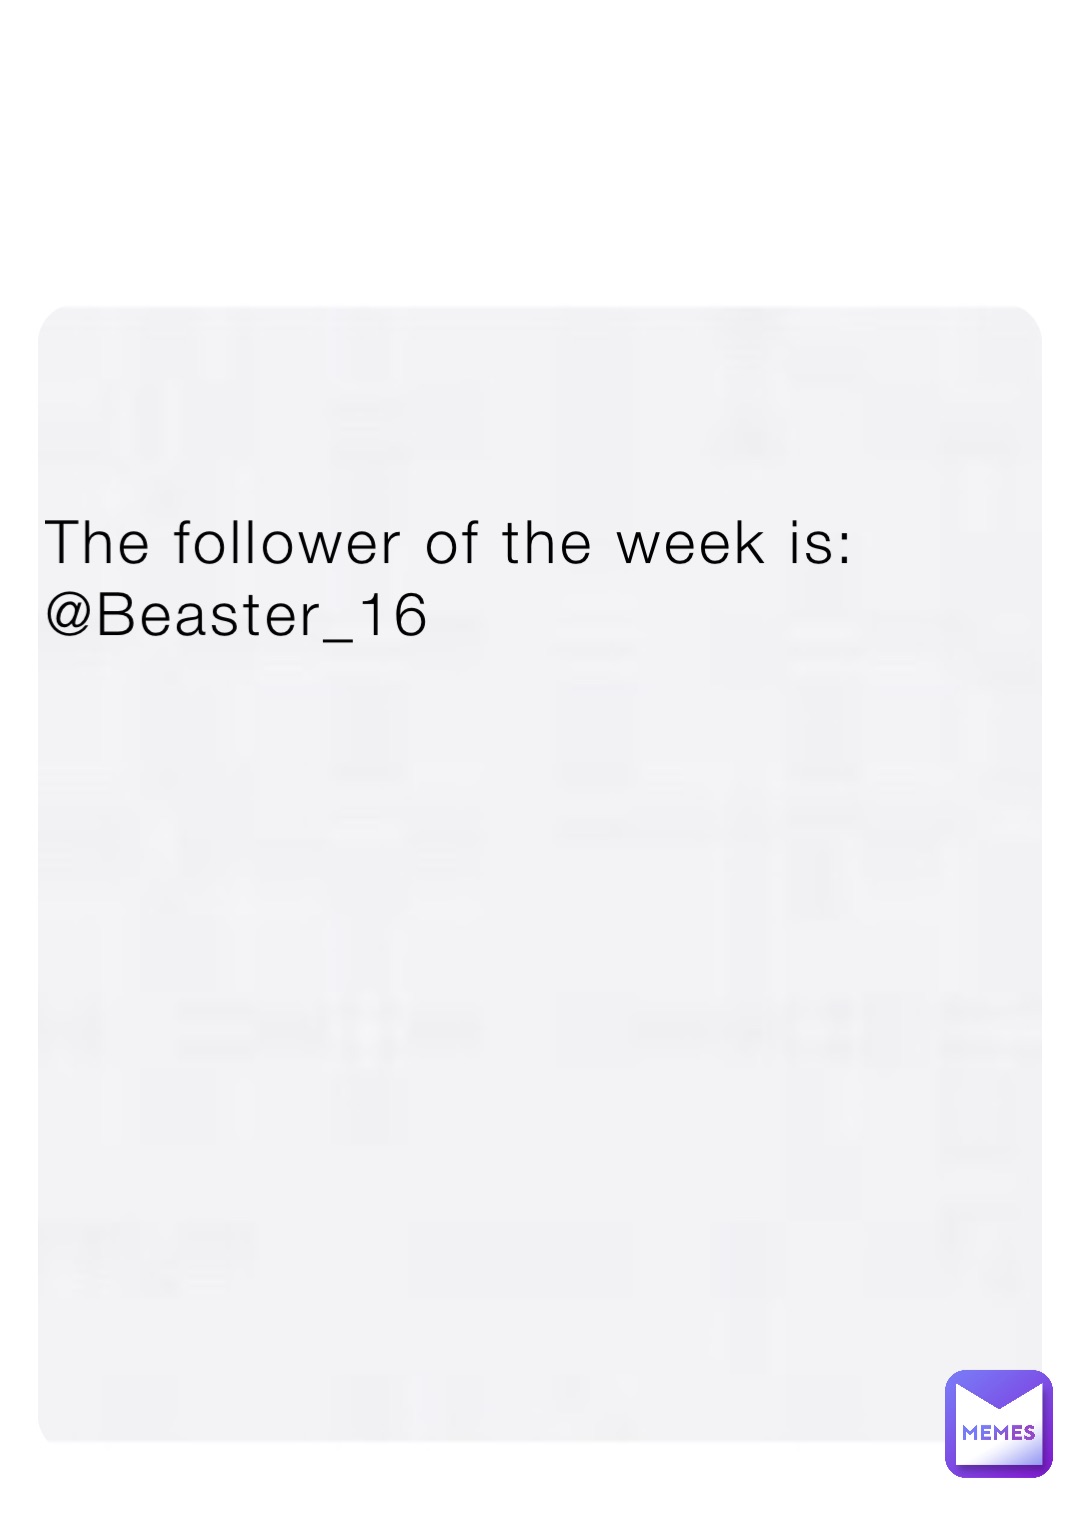 The follower of the week is:
@Beaster_16